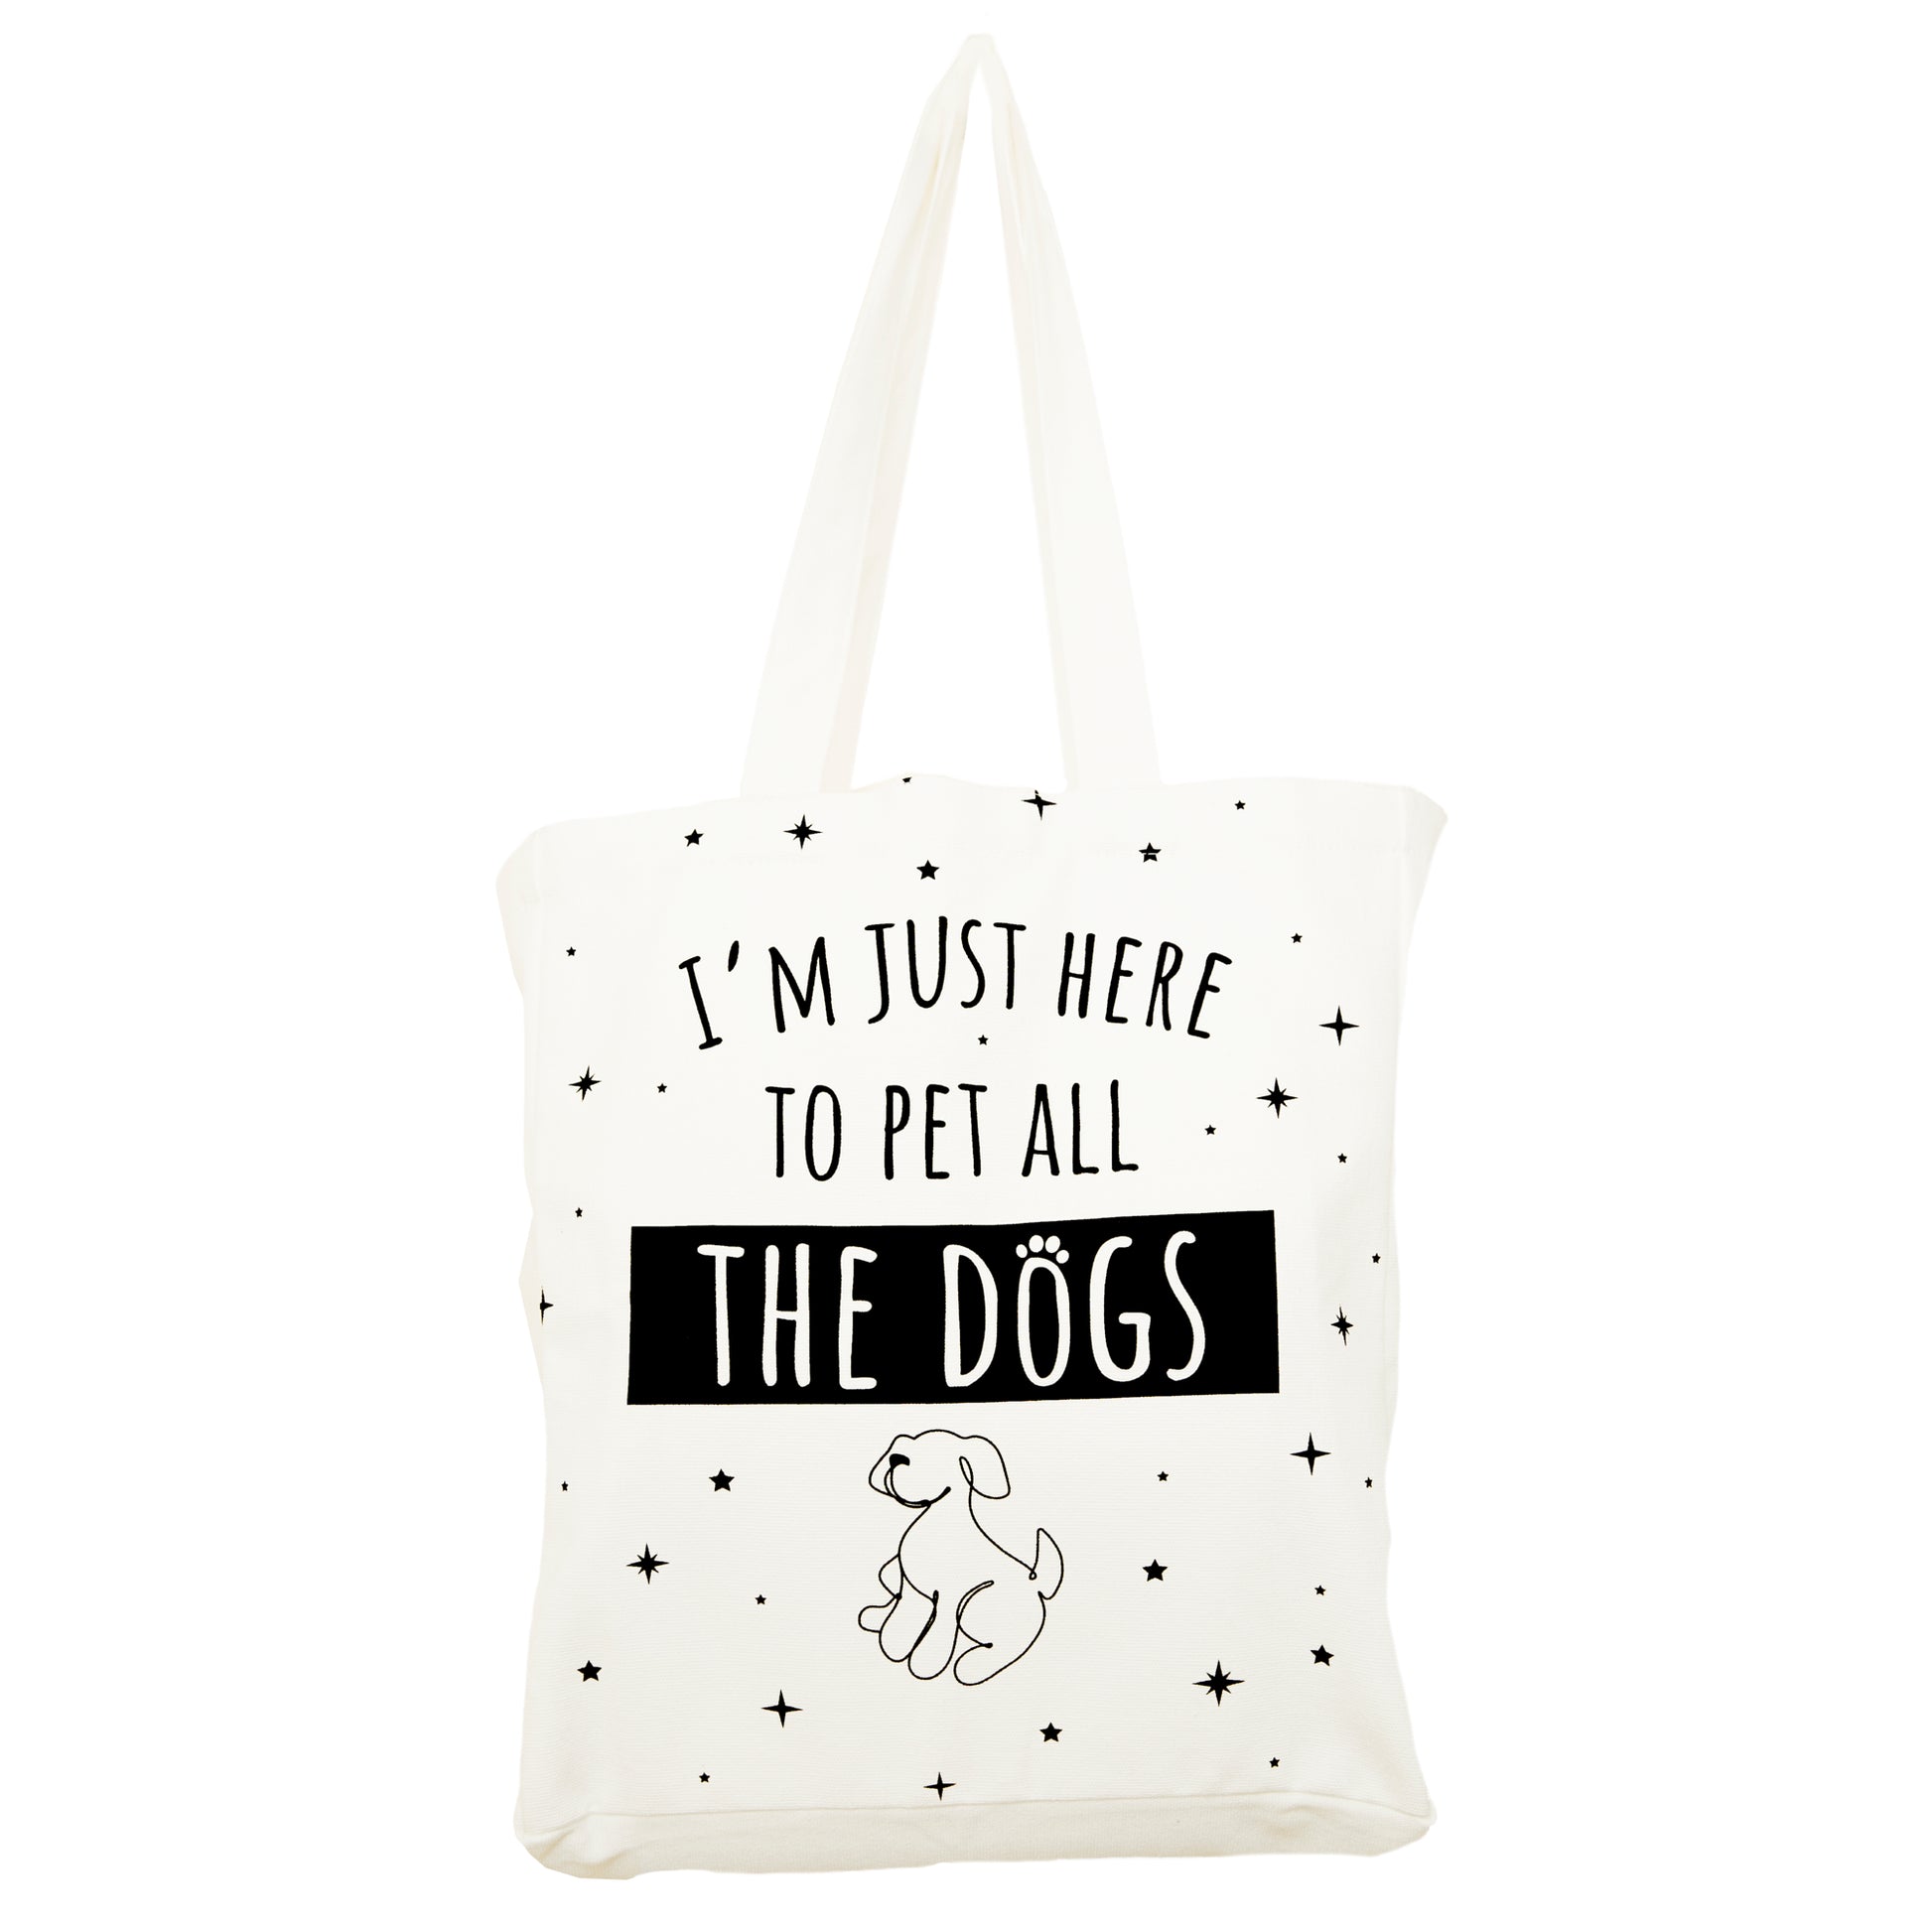 Black Tote Bag: Your Word